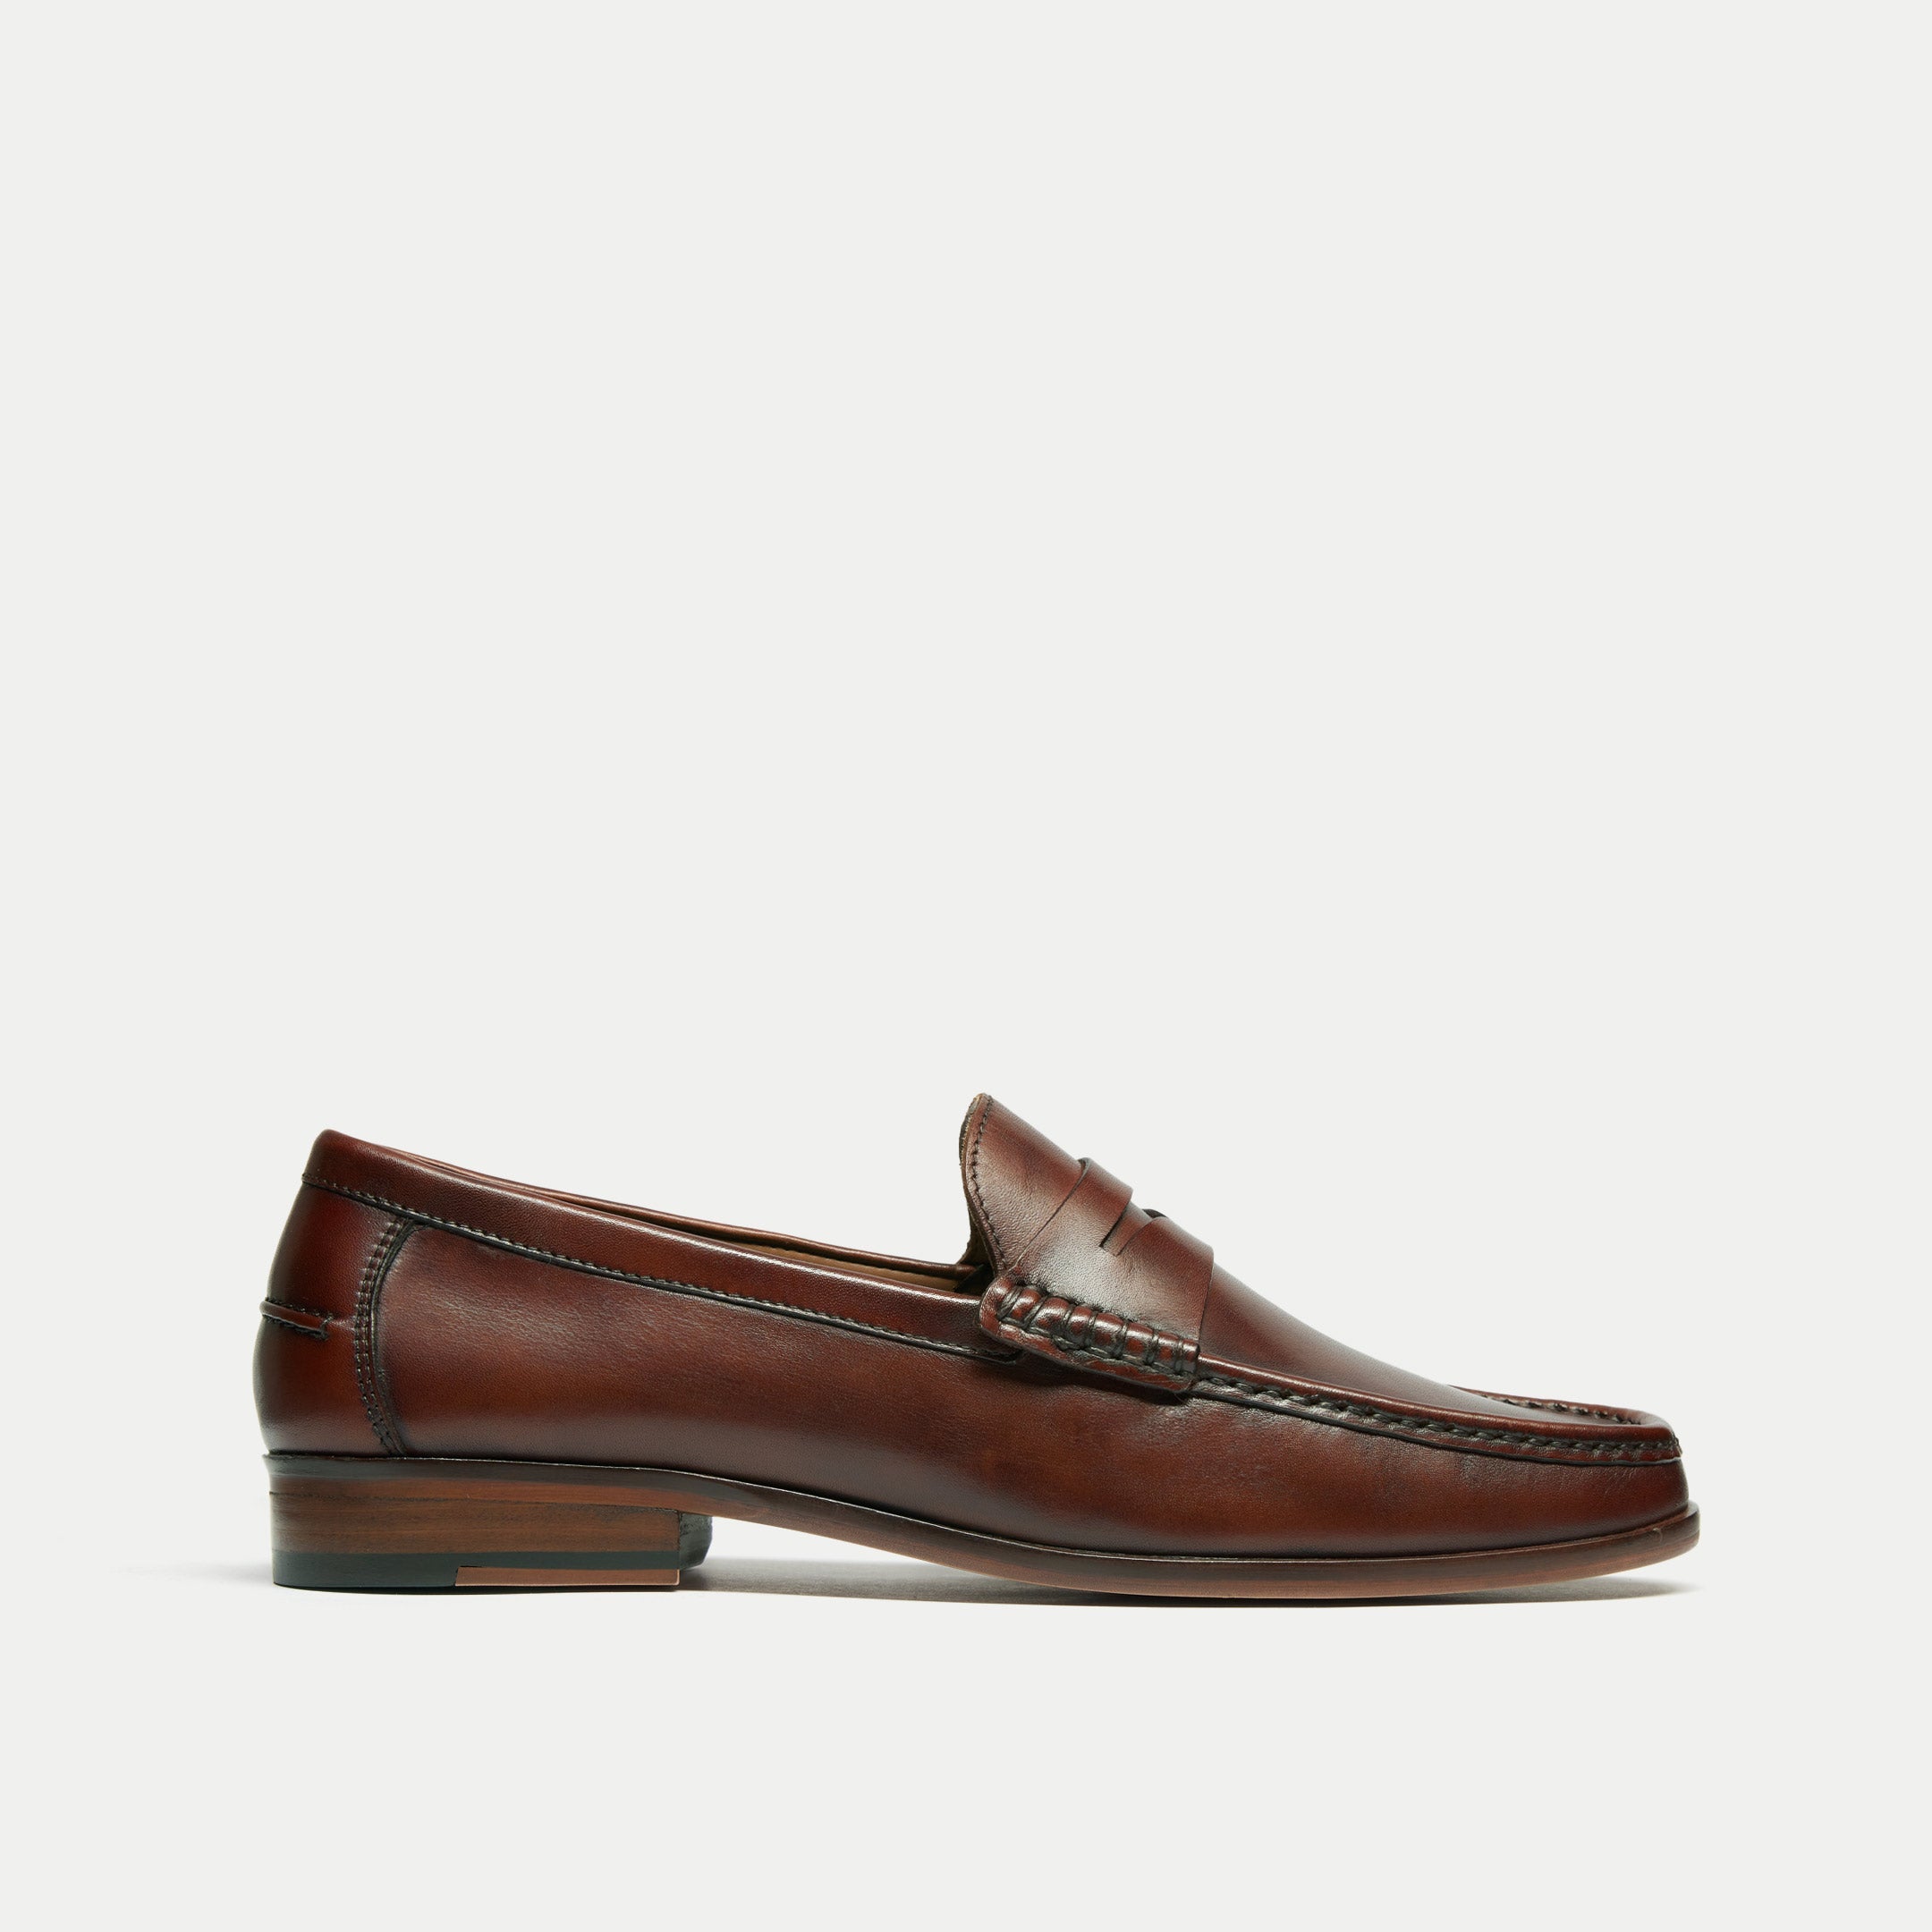 Walk London Mens Tino Saddle Loafer in Brown Leather